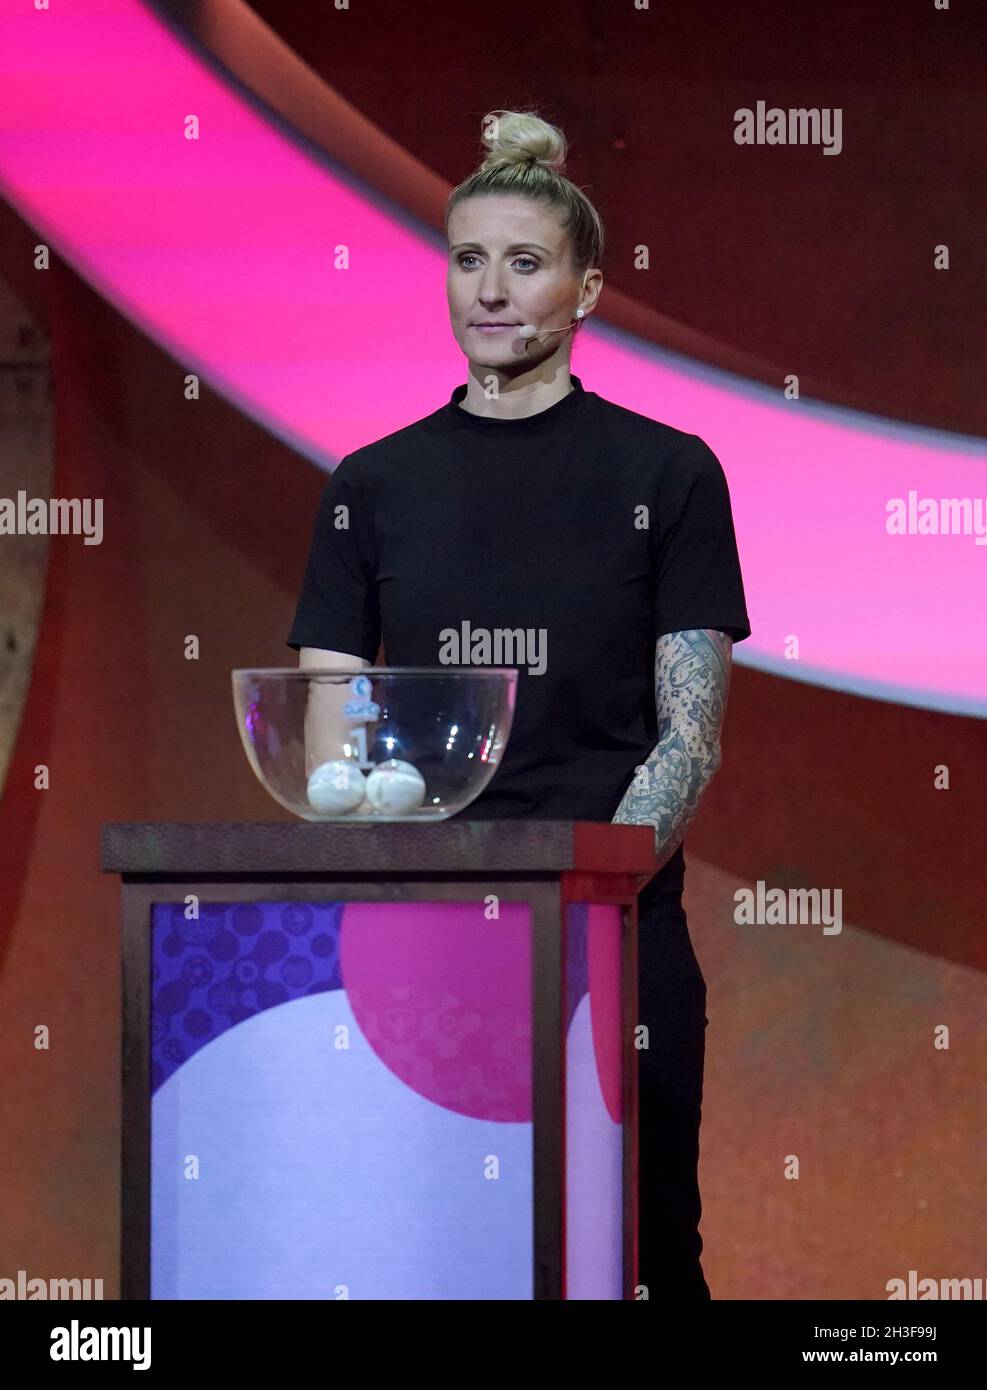 RB Leipzig player-coach Anja Mittag during the UEFA Women's Euro 2022 draw at O2 Victoria Warehouse, Manchester. Picture date: Thursday October 28, 2021. Stock Photo